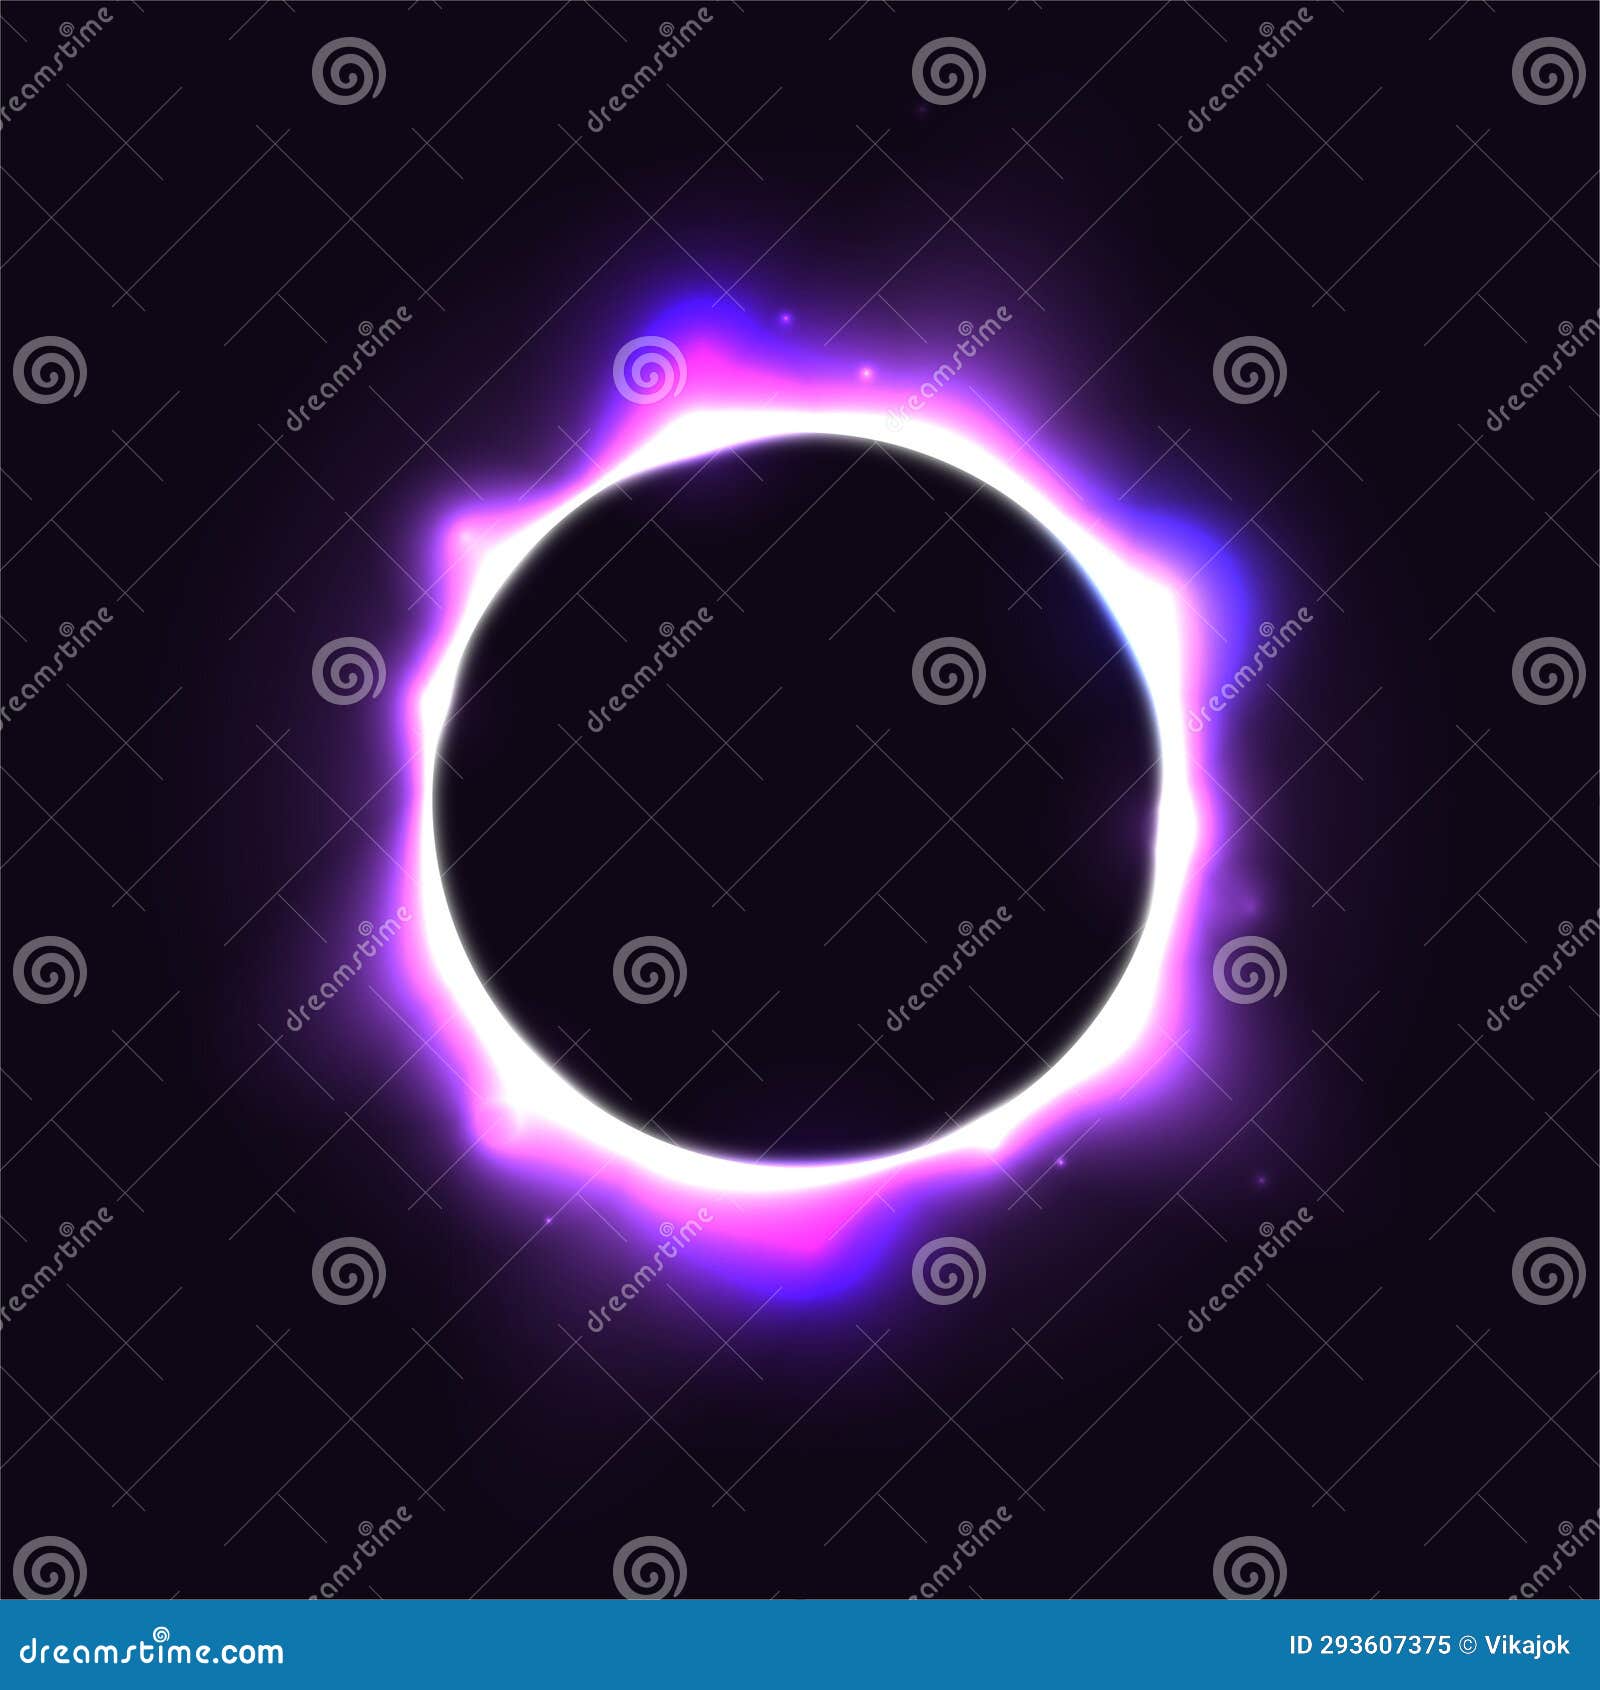 sun full eclipse concept. light purple moon glow background. solar or planet total eclipse in dark space. hot star